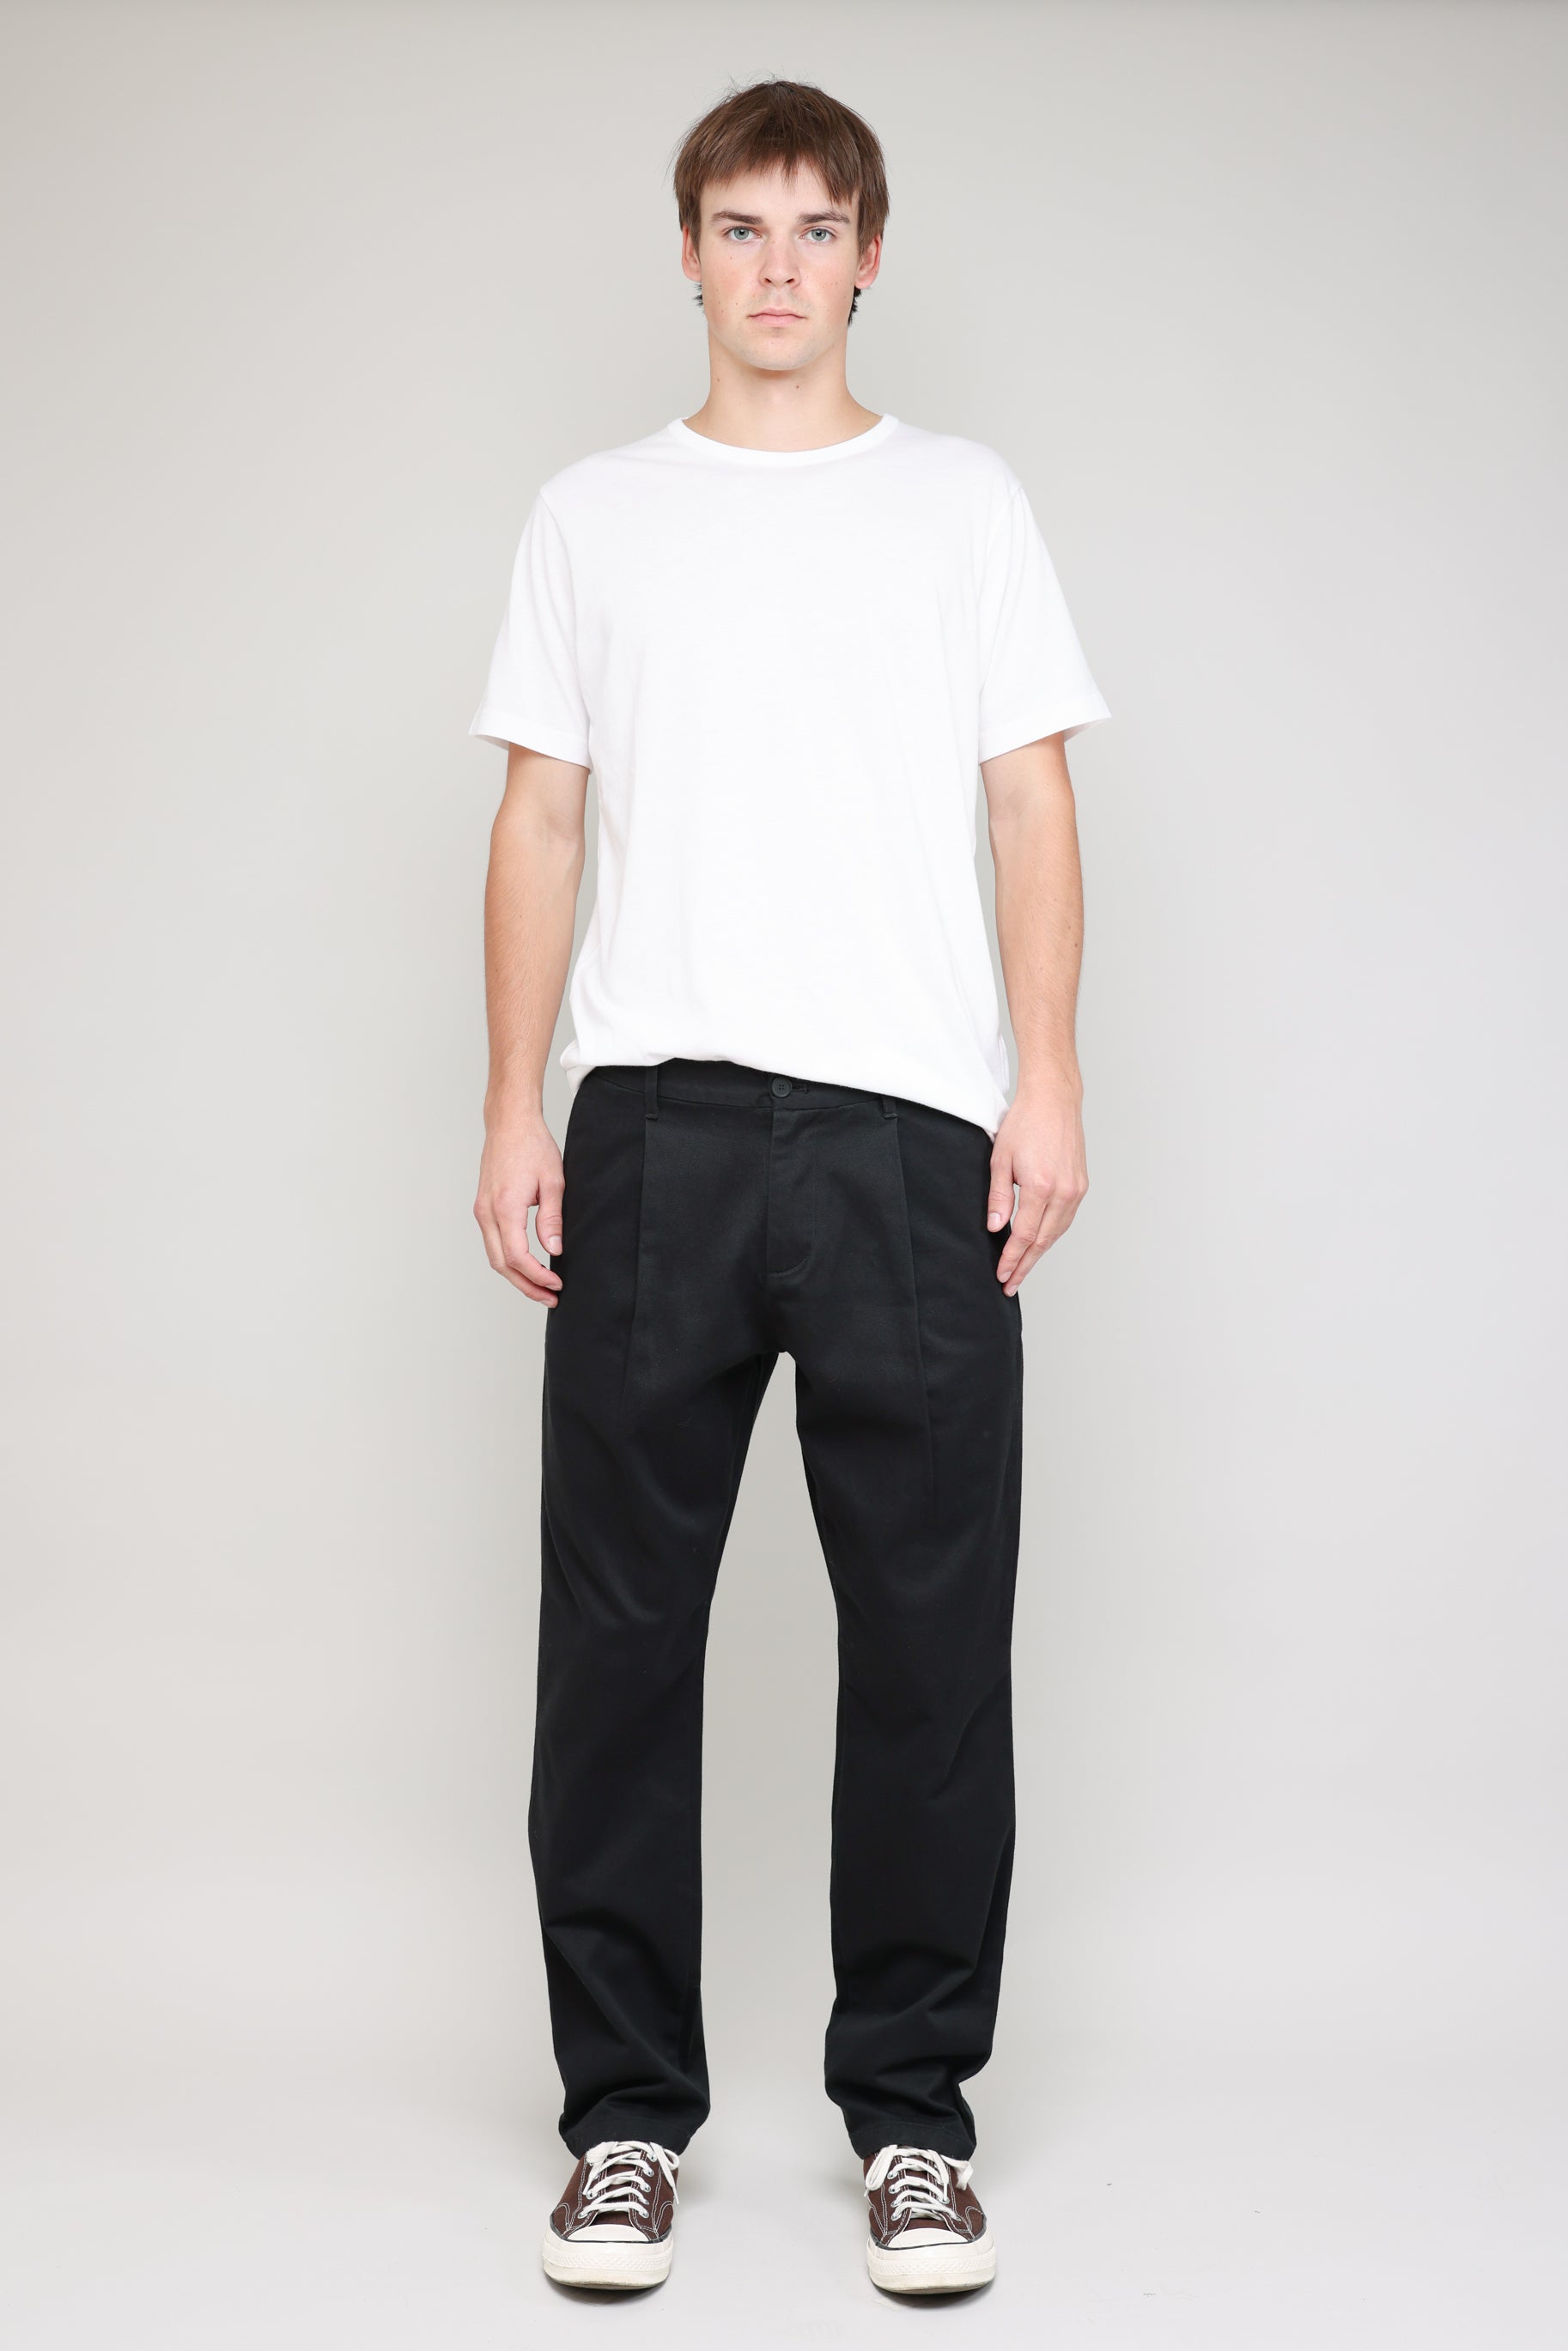 Pleated Chino Texture Cloth in Black 02